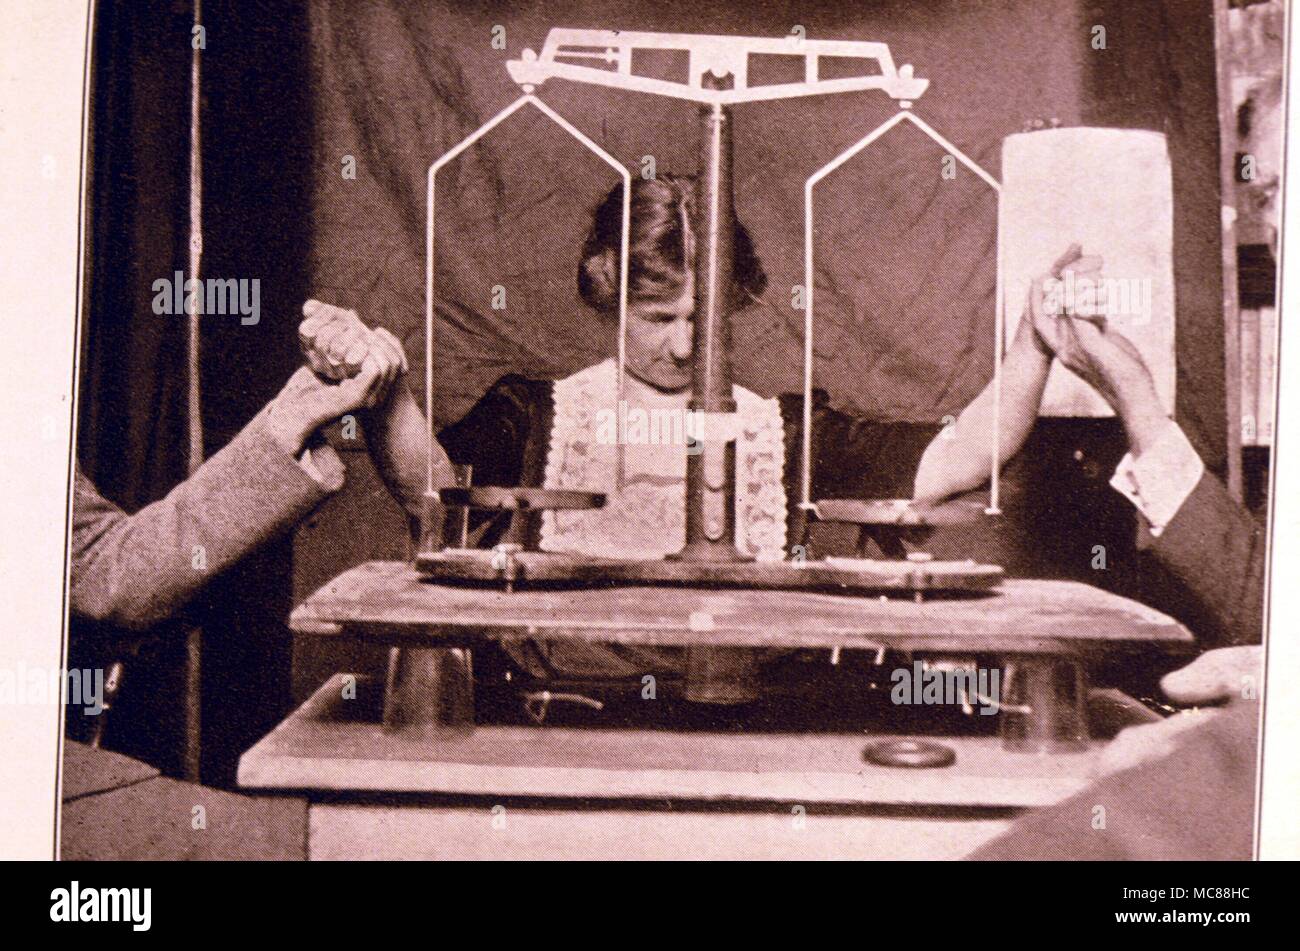 SEANCES - INVESTIGATION METHODS The scales test (pans moved by unknown psychic forces) during the 'Margery' mediumship tests held at the New York and Boston seances of the SPR in 1925. Stock Photo